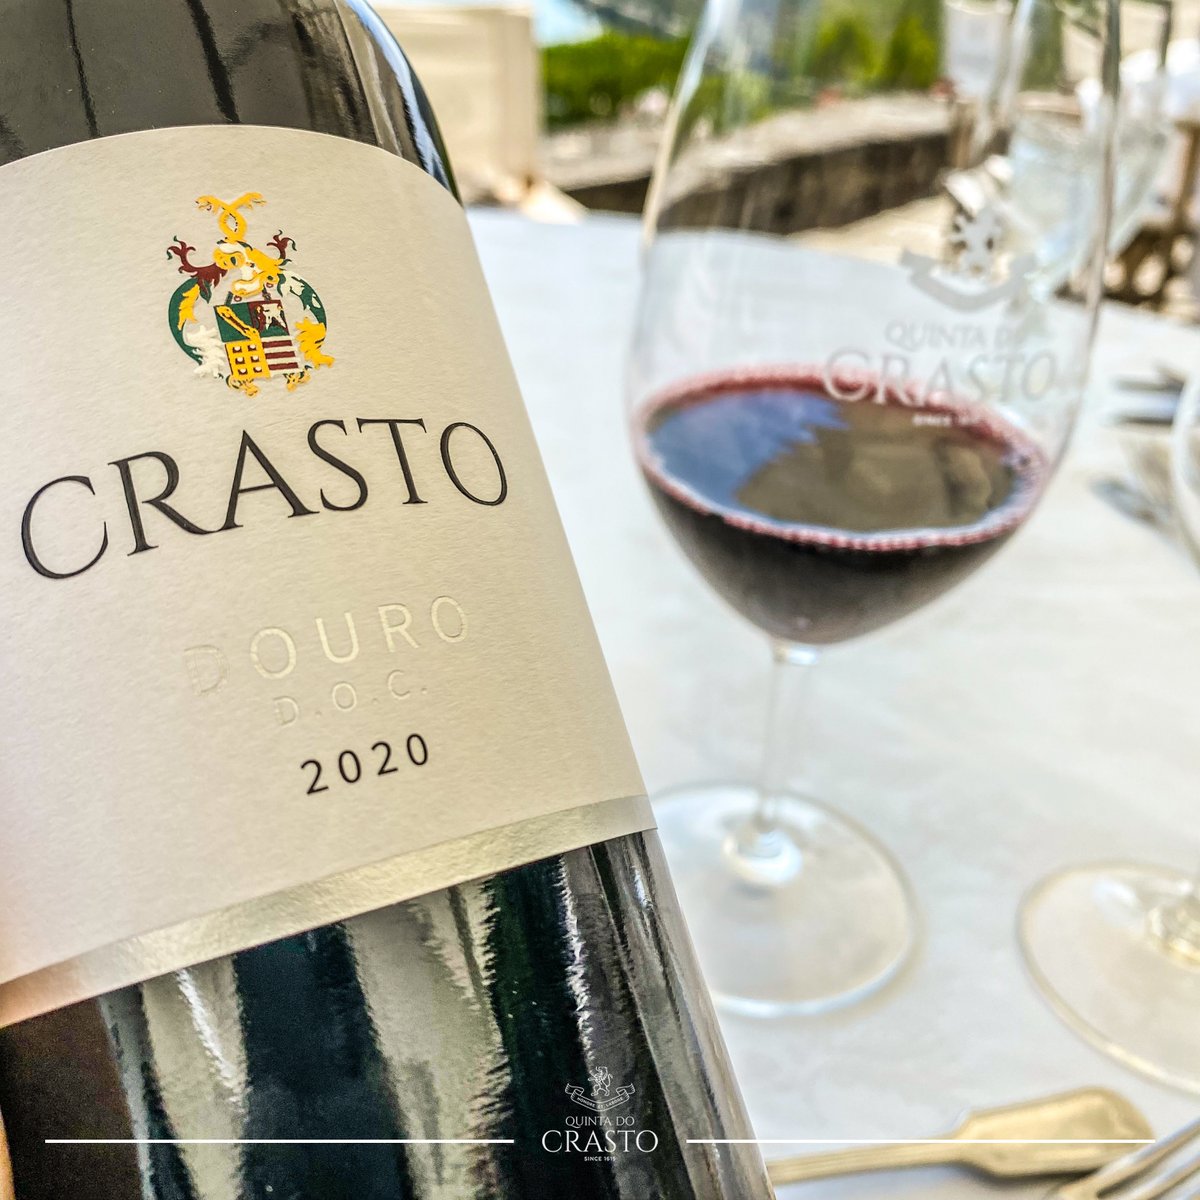 Crasto Red 2020 to accompany lunch. And with a new label! 😉🍷✨👉🏼 Find out more here: quintadocrasto.pt/crasto-red/?la…
👉🏼 Be sure to look for your favourite #wine in your usual #restaurant or #wineshop.🍷
#Crasto #Douro #DouroWines #Vegan #Vinhos #Wines #Wein #Weine #RedWine #VinhoTinto